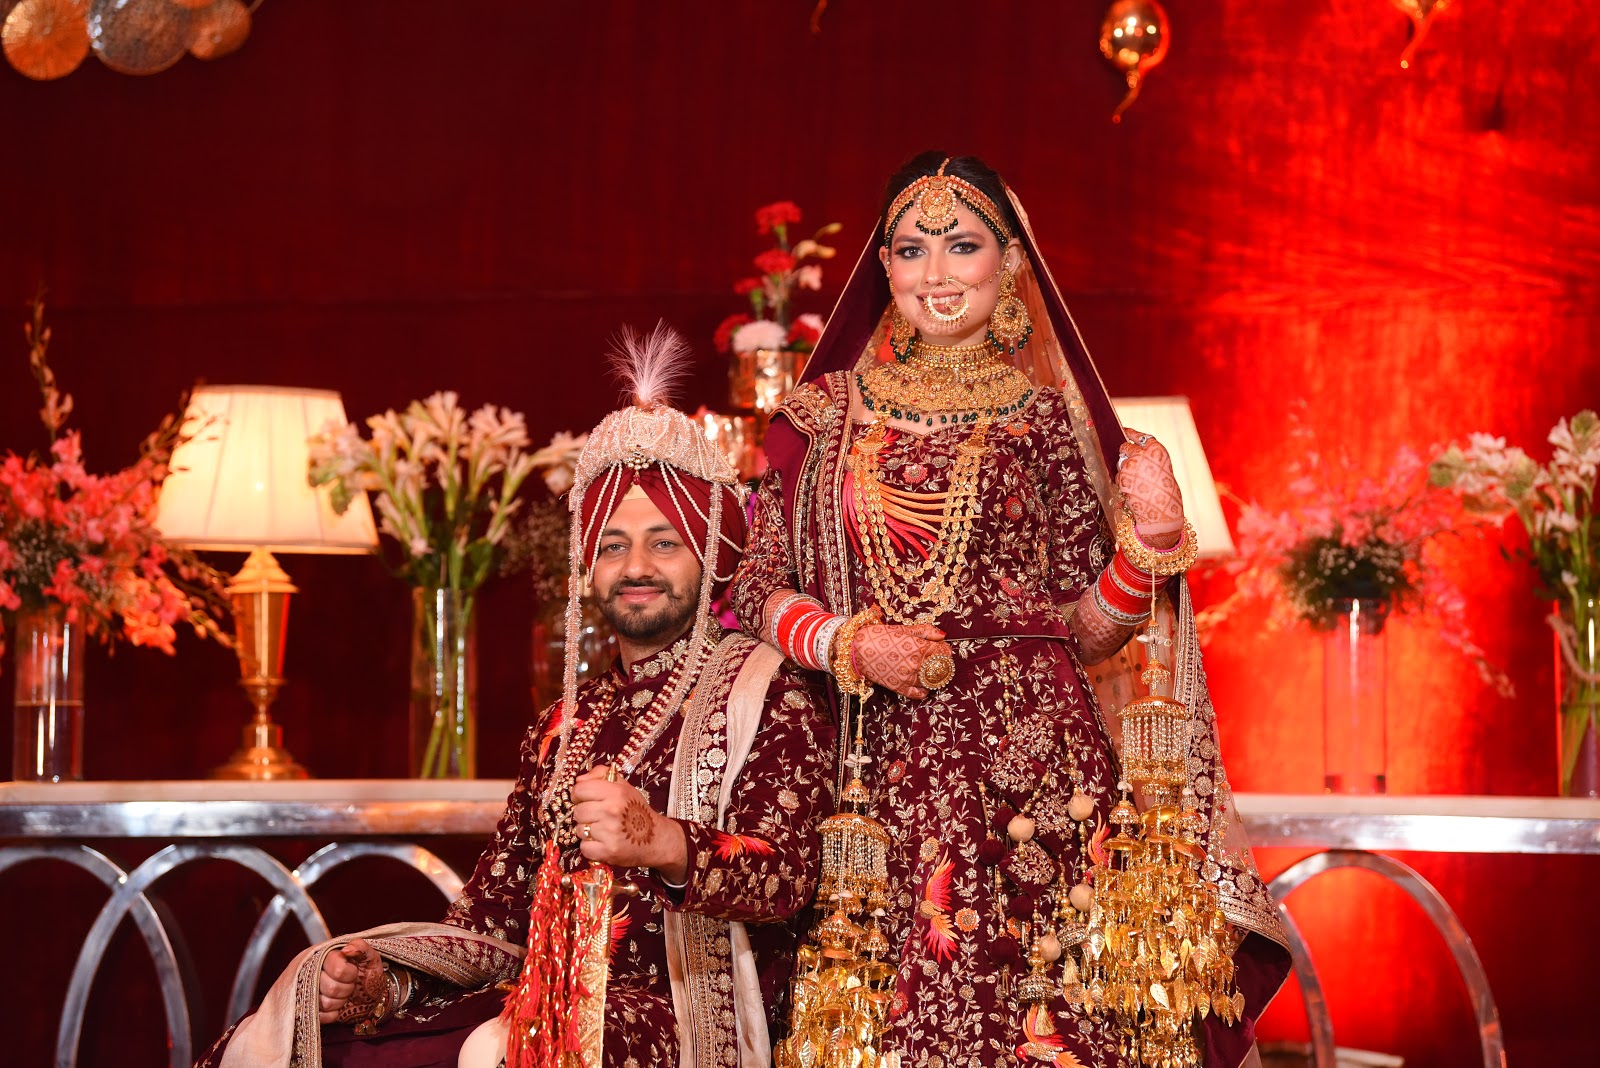 We are known as the best candid wedding photographers in Zirakpur.